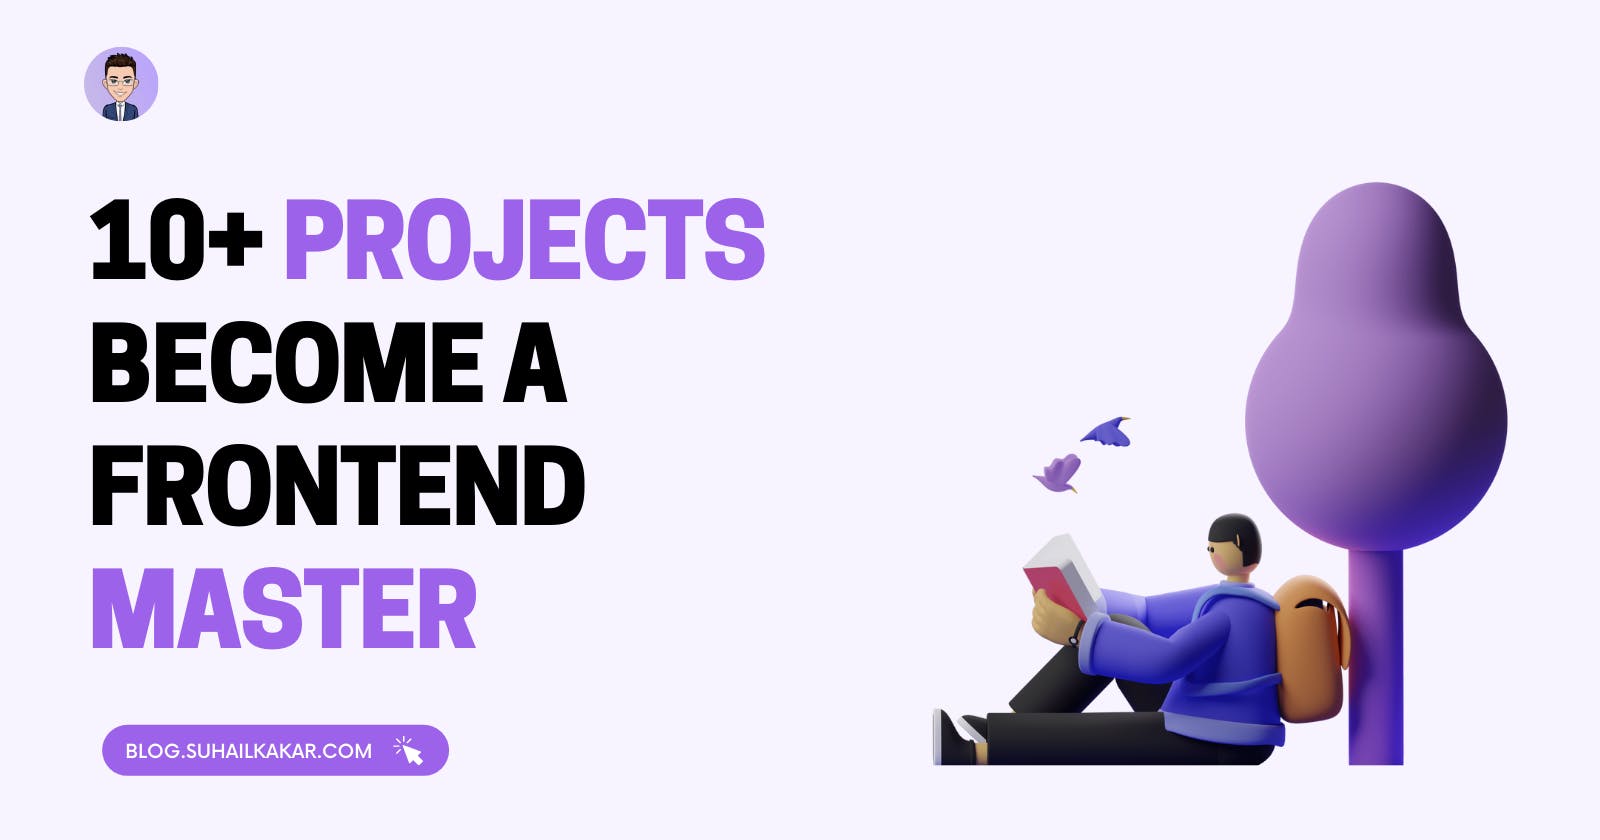 10+ Projects You Can Do to Become a Frontend Master